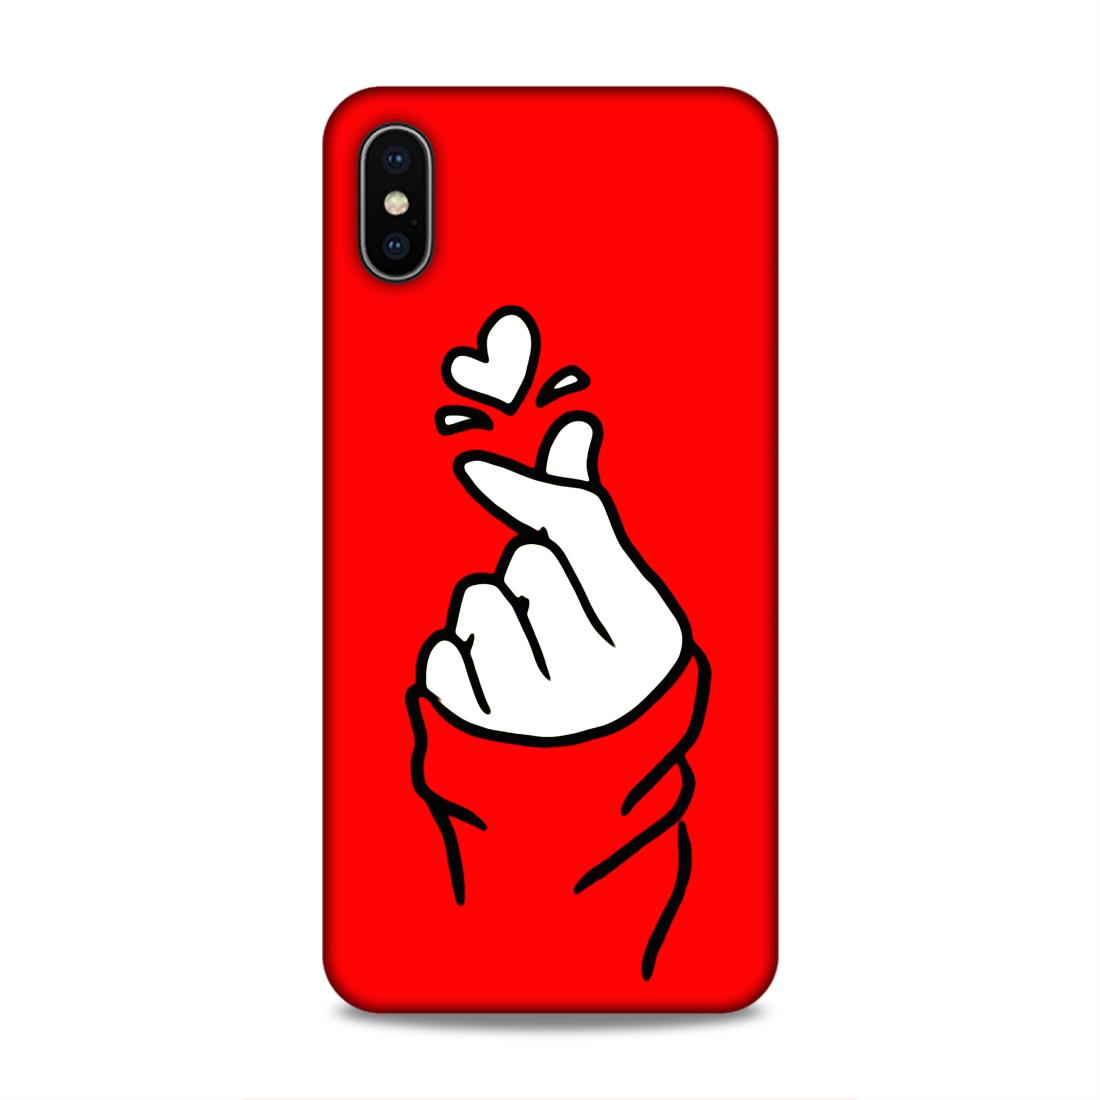 Love Hard Back Case For Apple iPhone XS Max